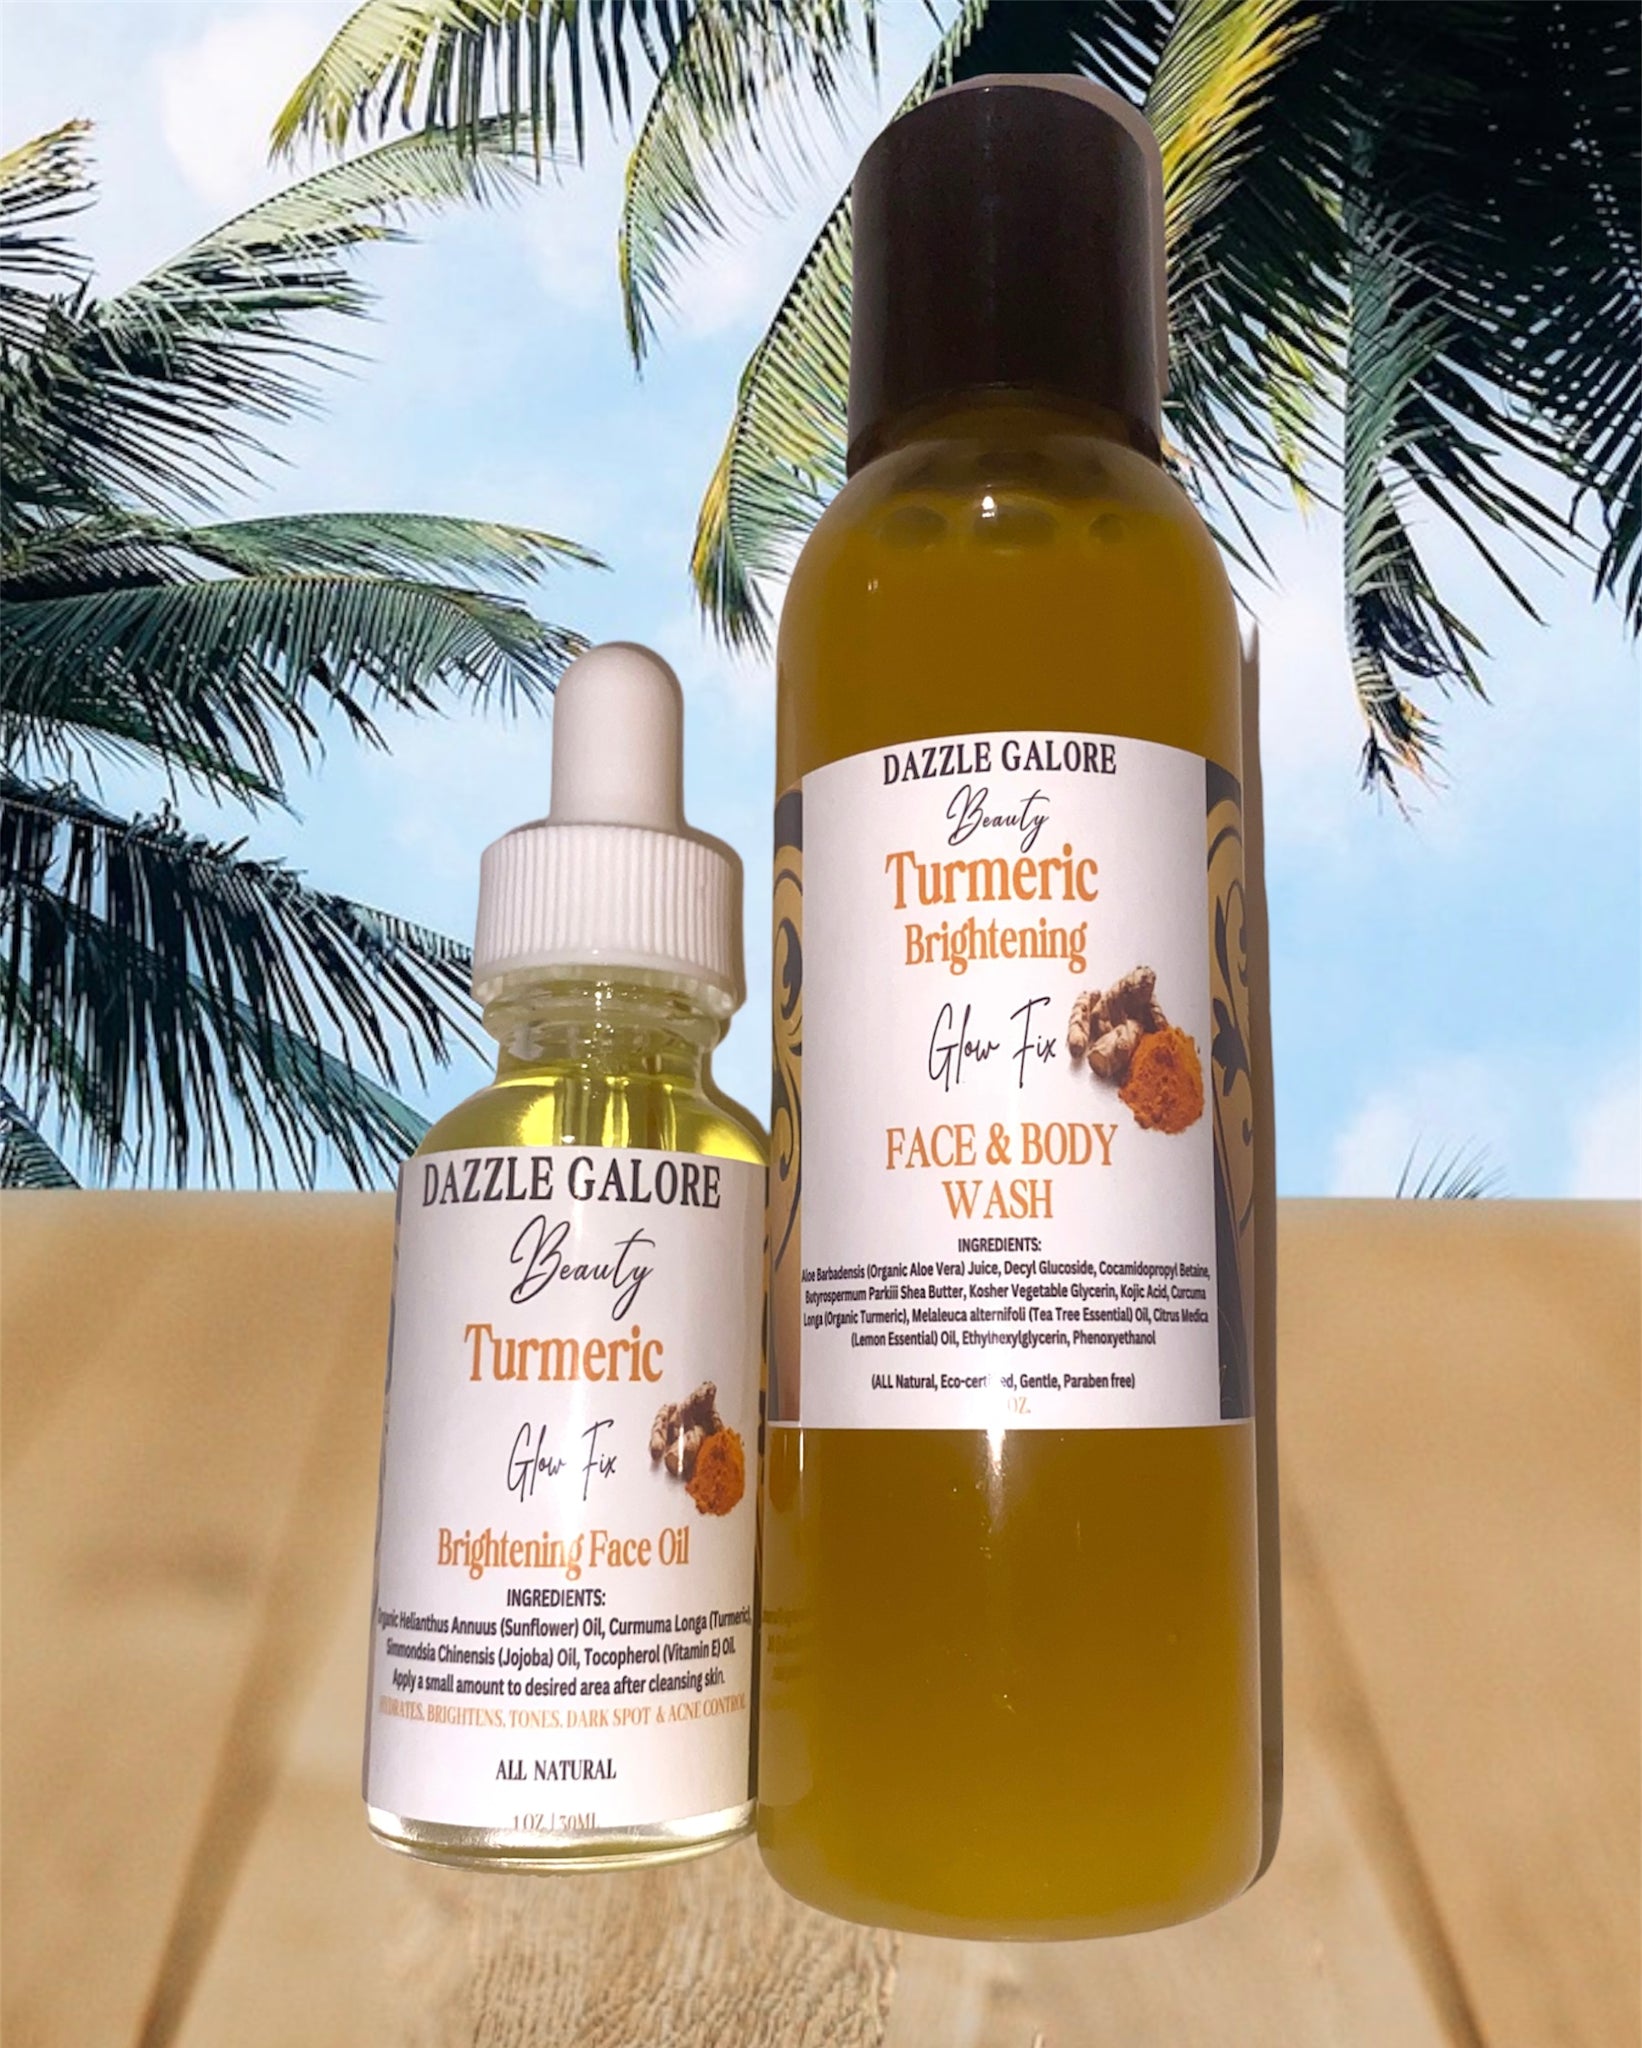 Best seller ALL Natural Turmeric brightening glow fix face oil / face & body wash